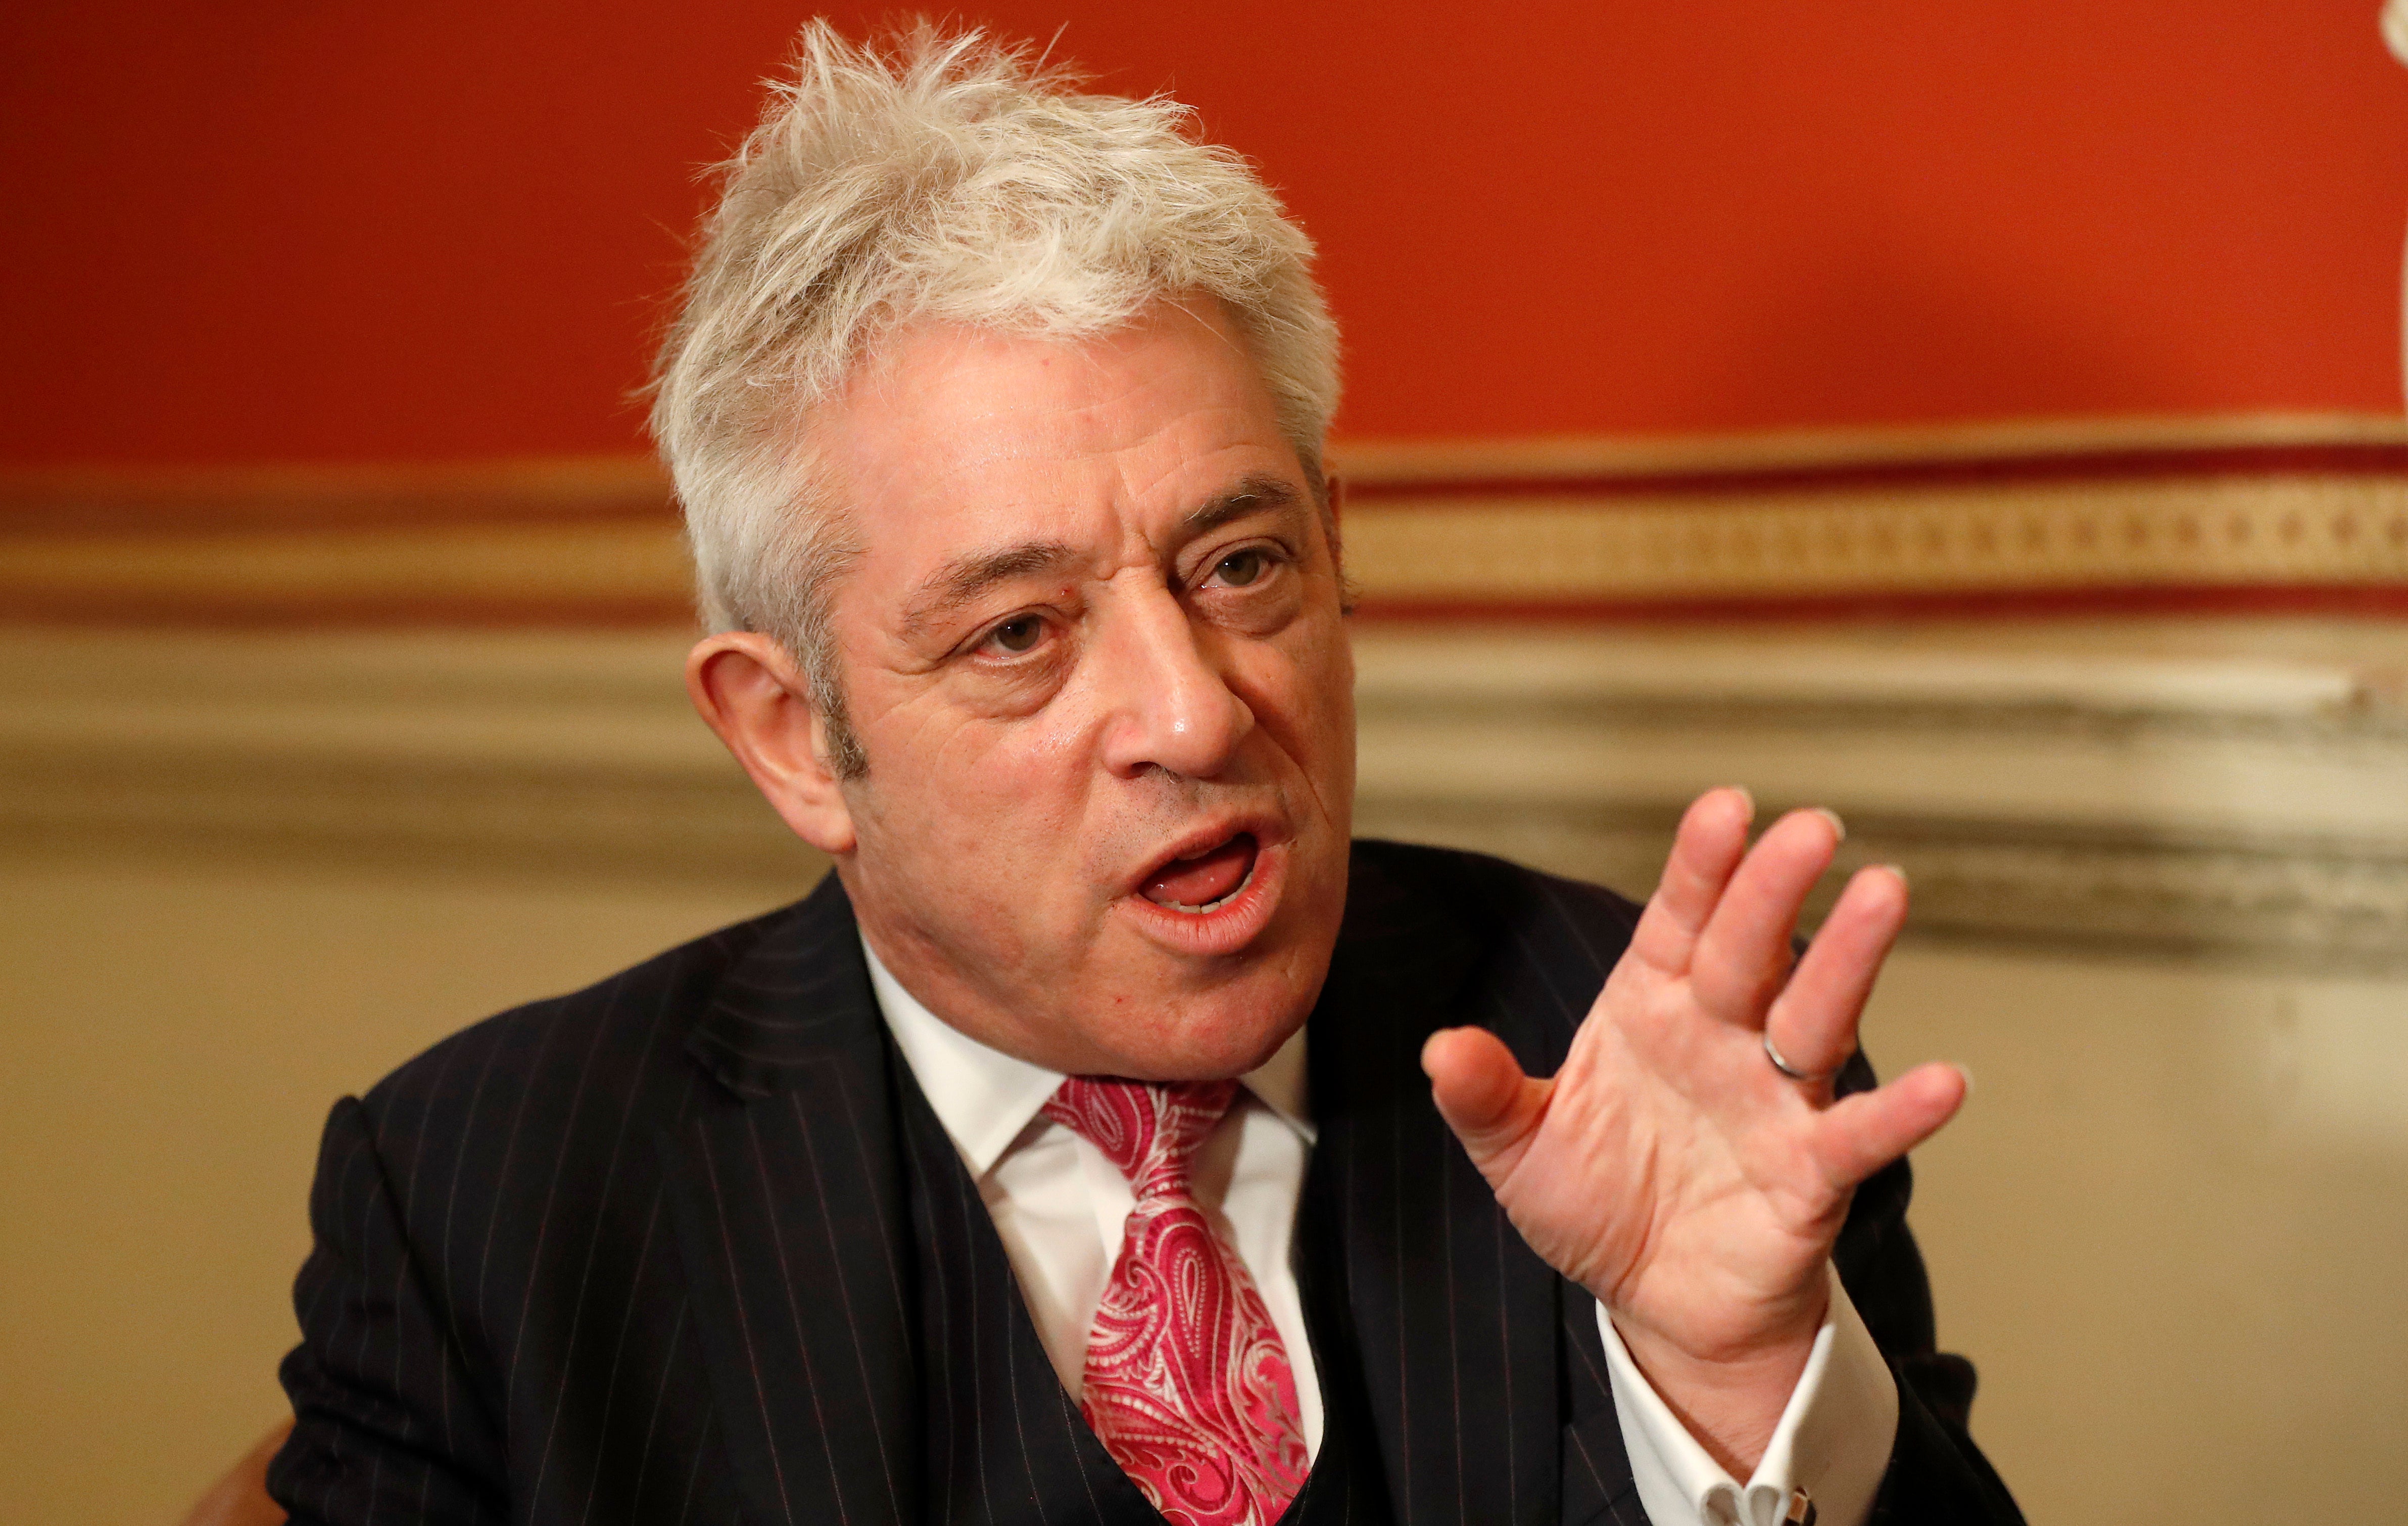 At the time of writing, John Bercow remains under investigation for bullying